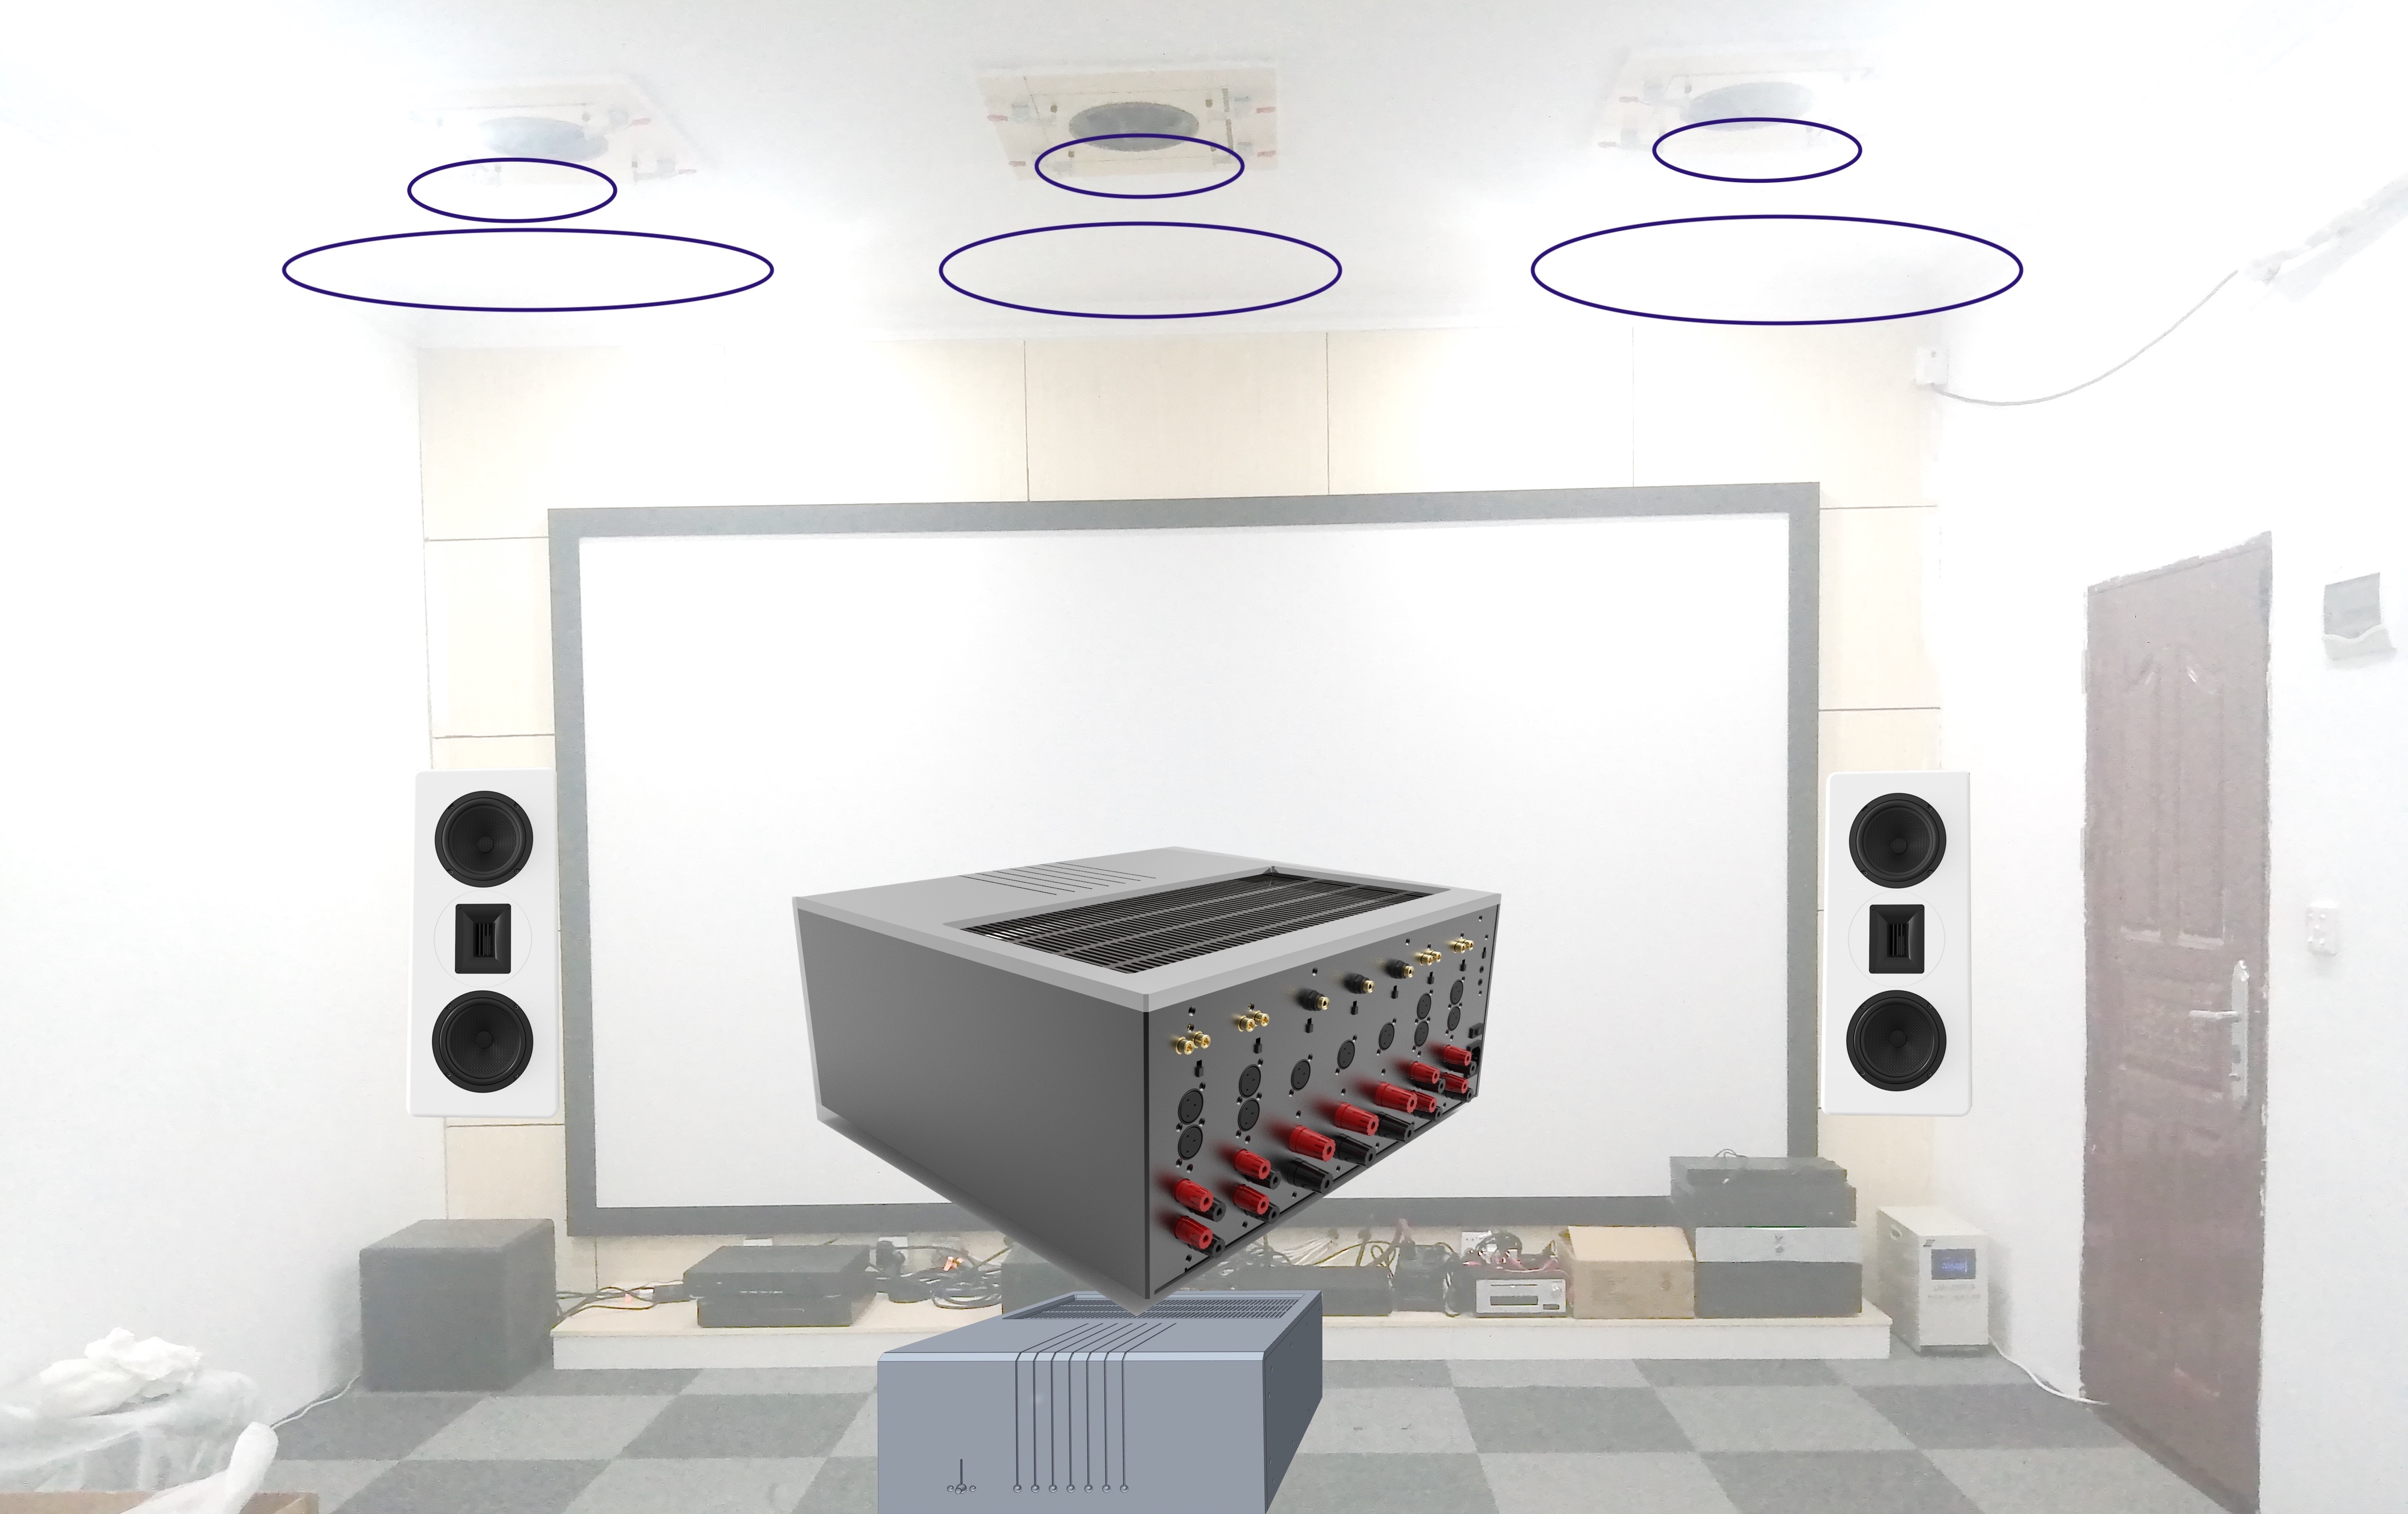  Some Misunderstandings of Home Theater Power Amplifier Selection